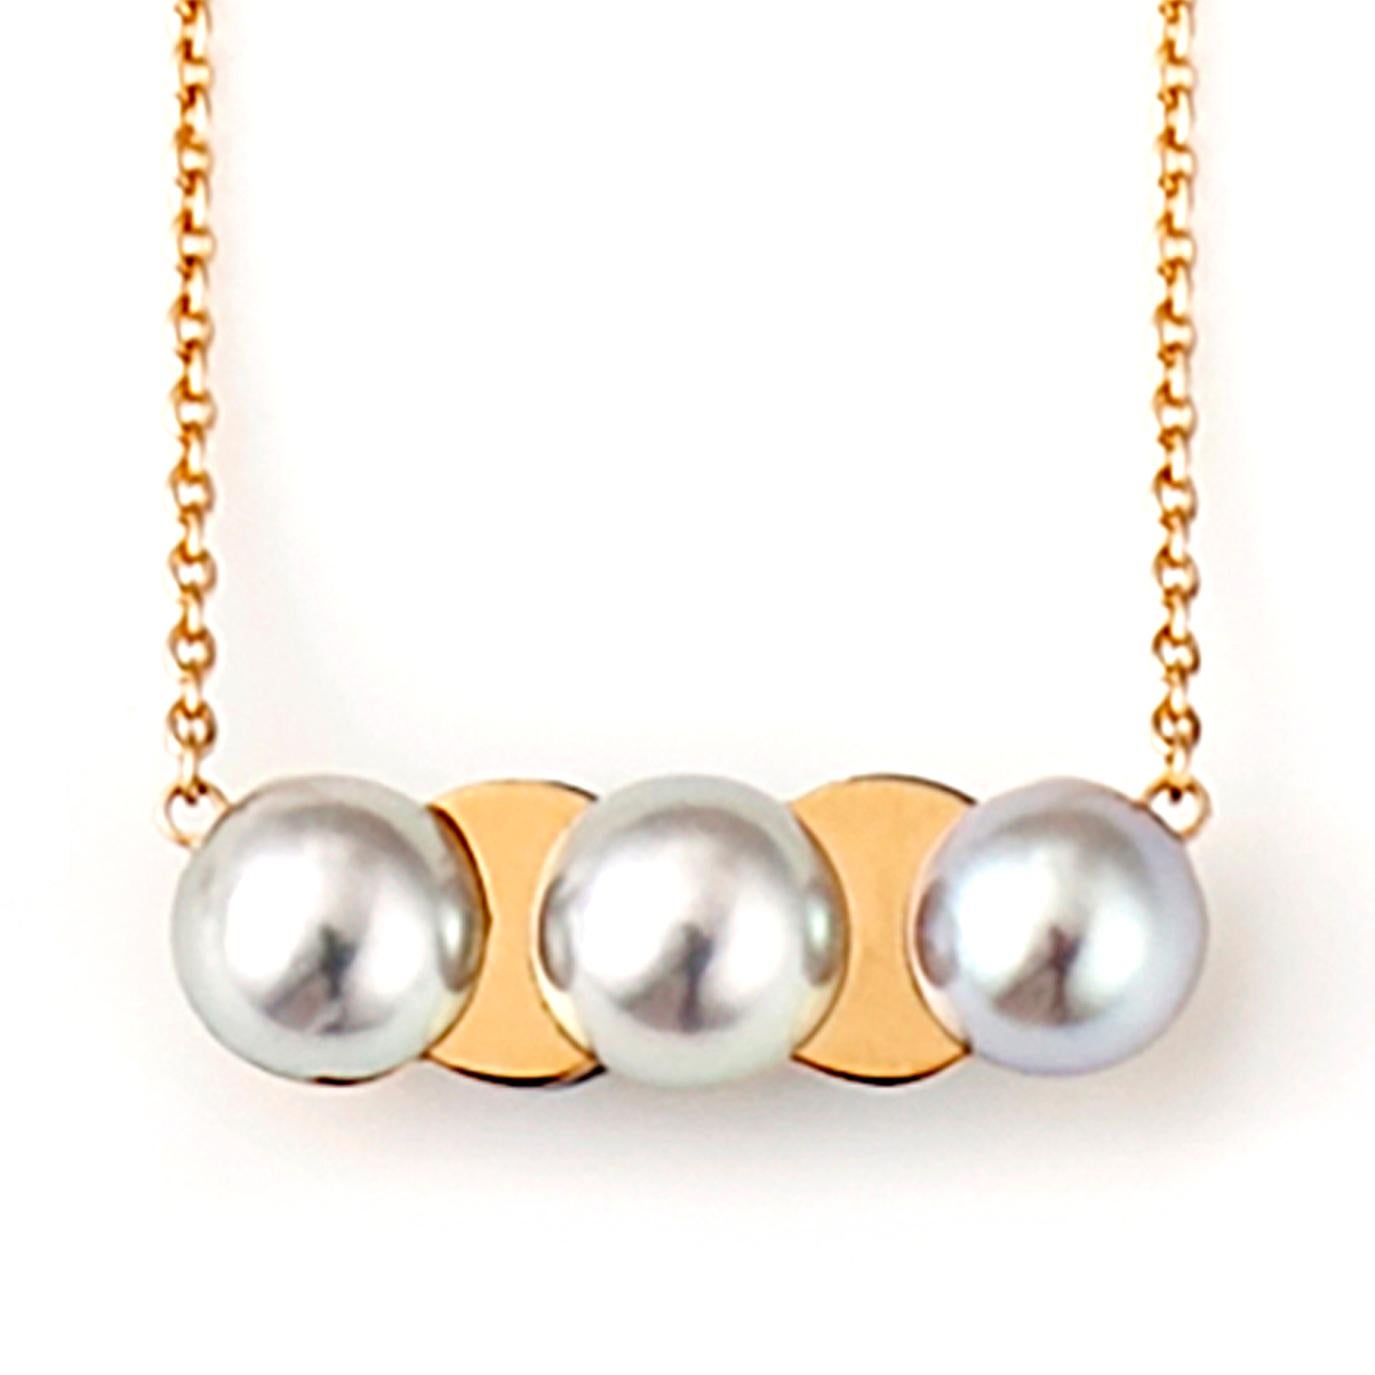 This necklace features a pendant of Akoya pearls of a silver grey hue cut in half and placed on a plate of 18 karat gold, allowing the contrasting materials to show through. It is a reversible design with 3 pearls on one side and 2 on the other. The